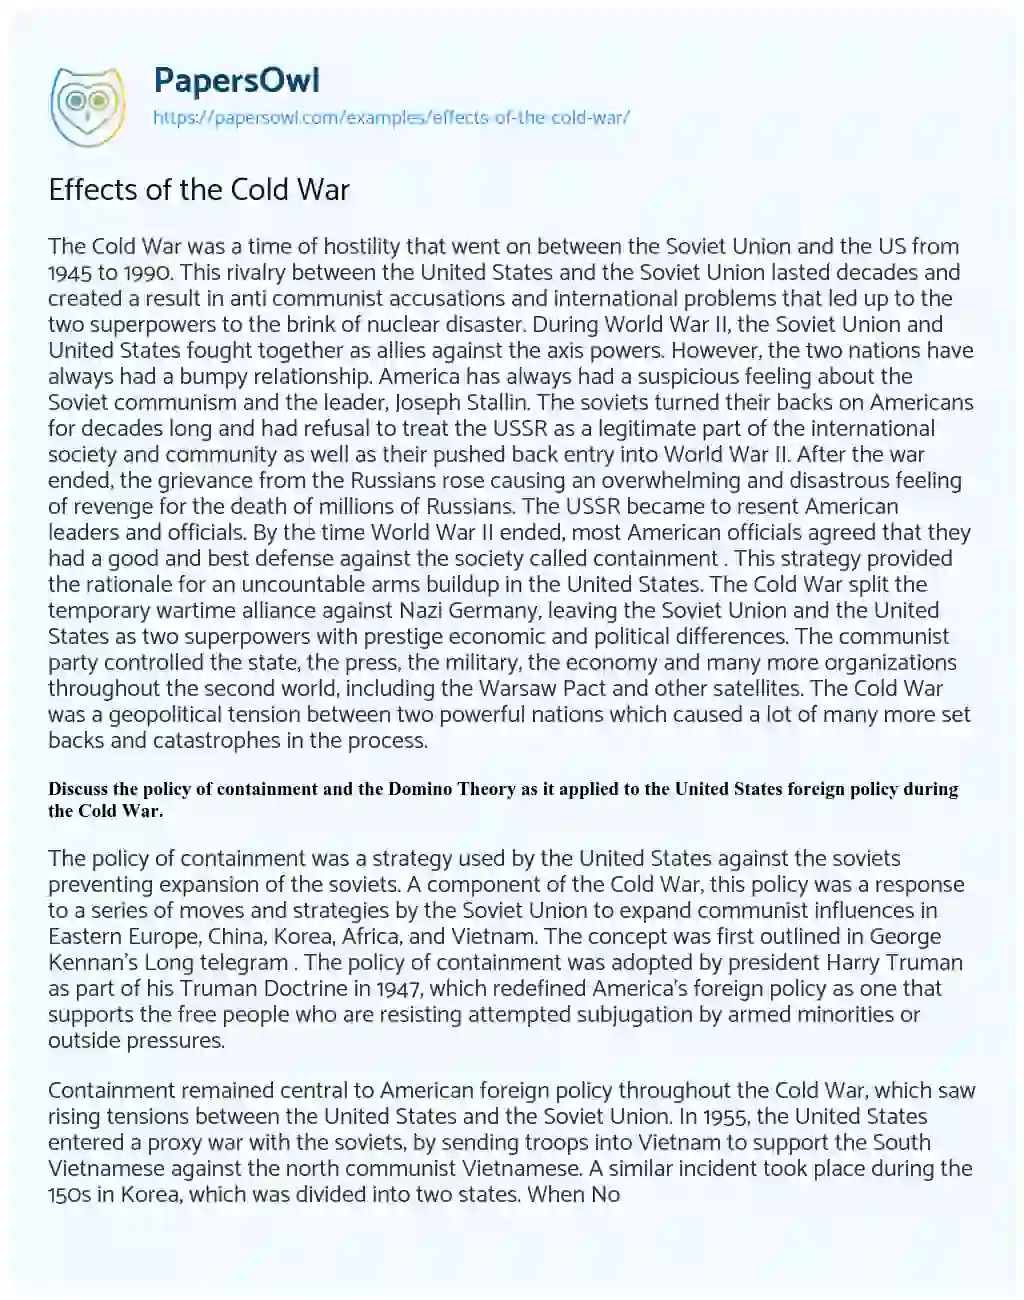 Essay on Effects of the Cold War